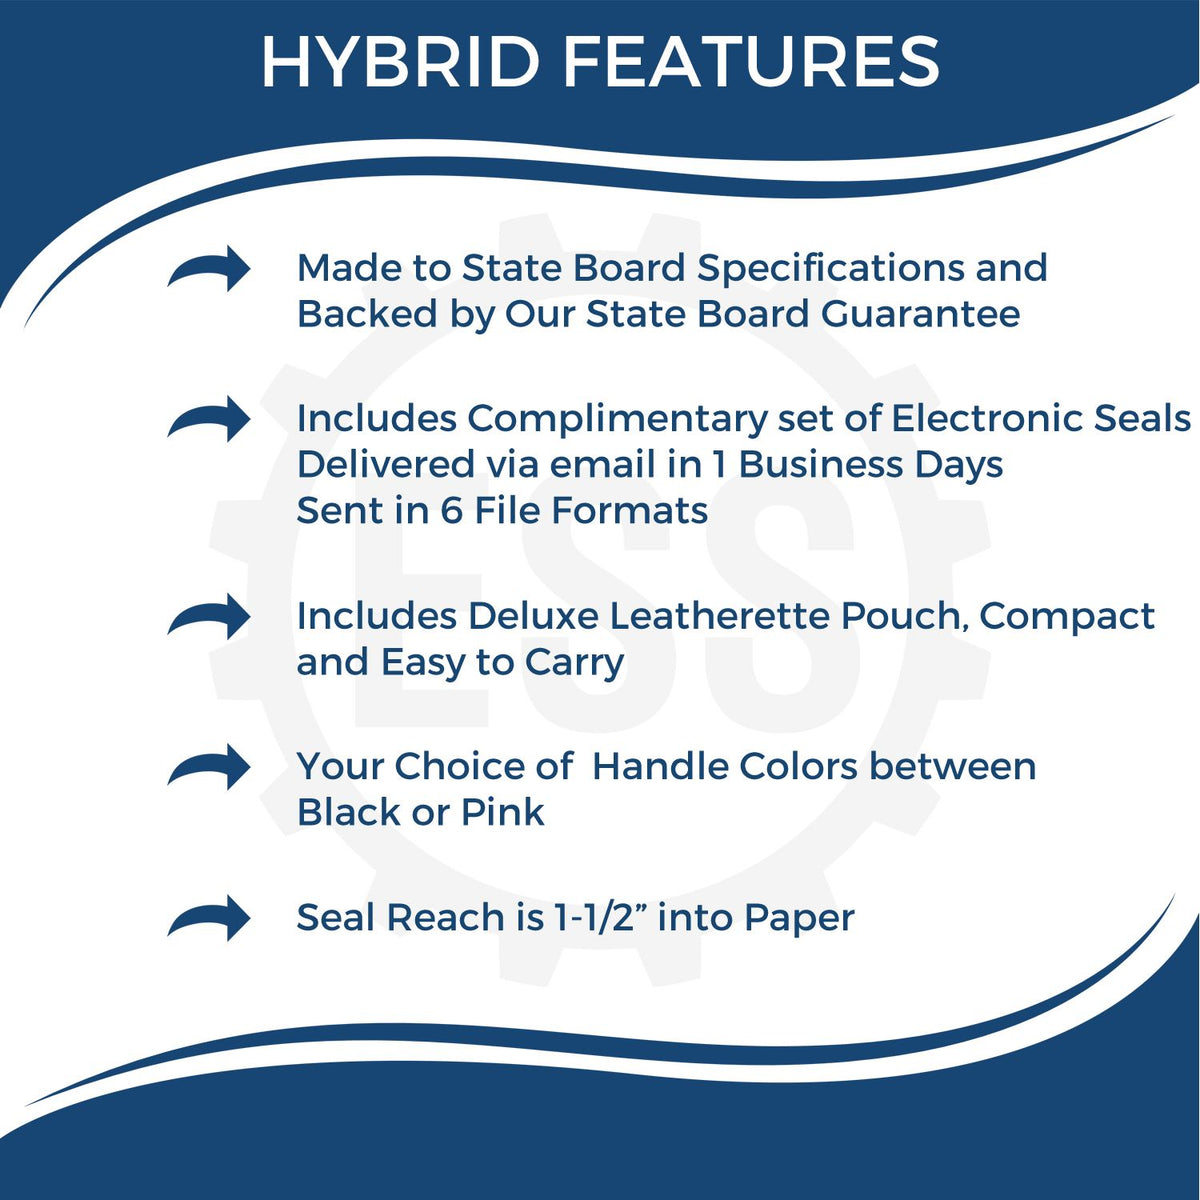 A picture of an infographic highlighting the selling points for the Hybrid Rhode Island Architect Seal